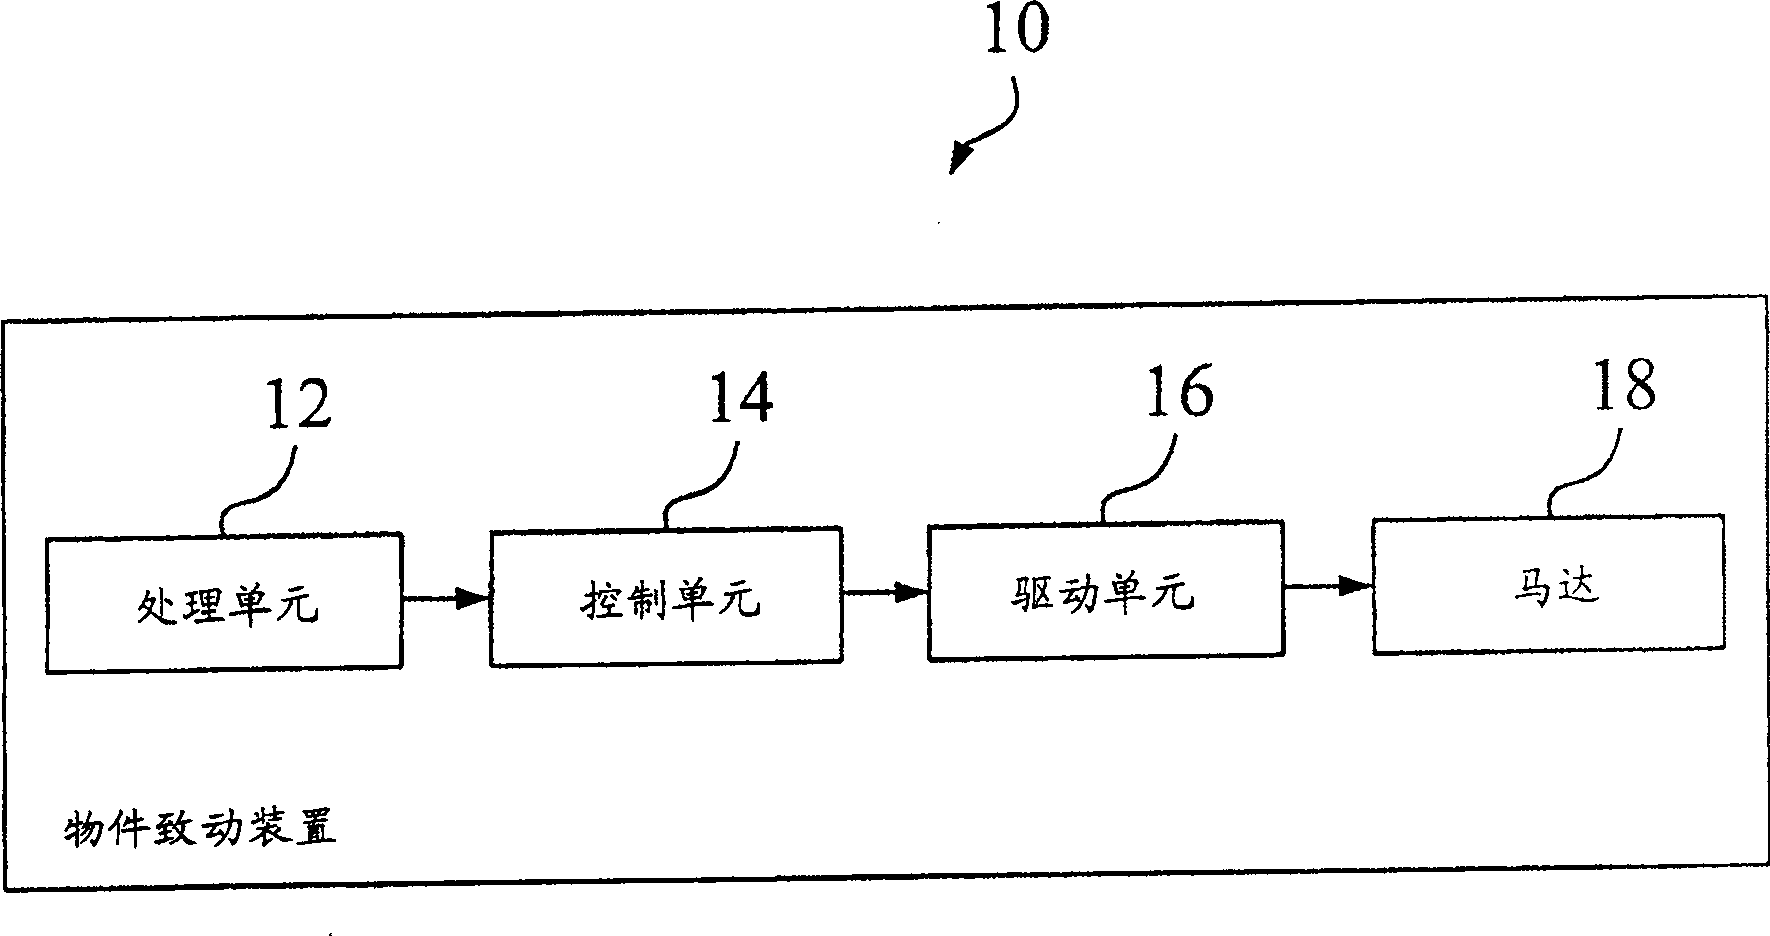 Object actuator and method therefor